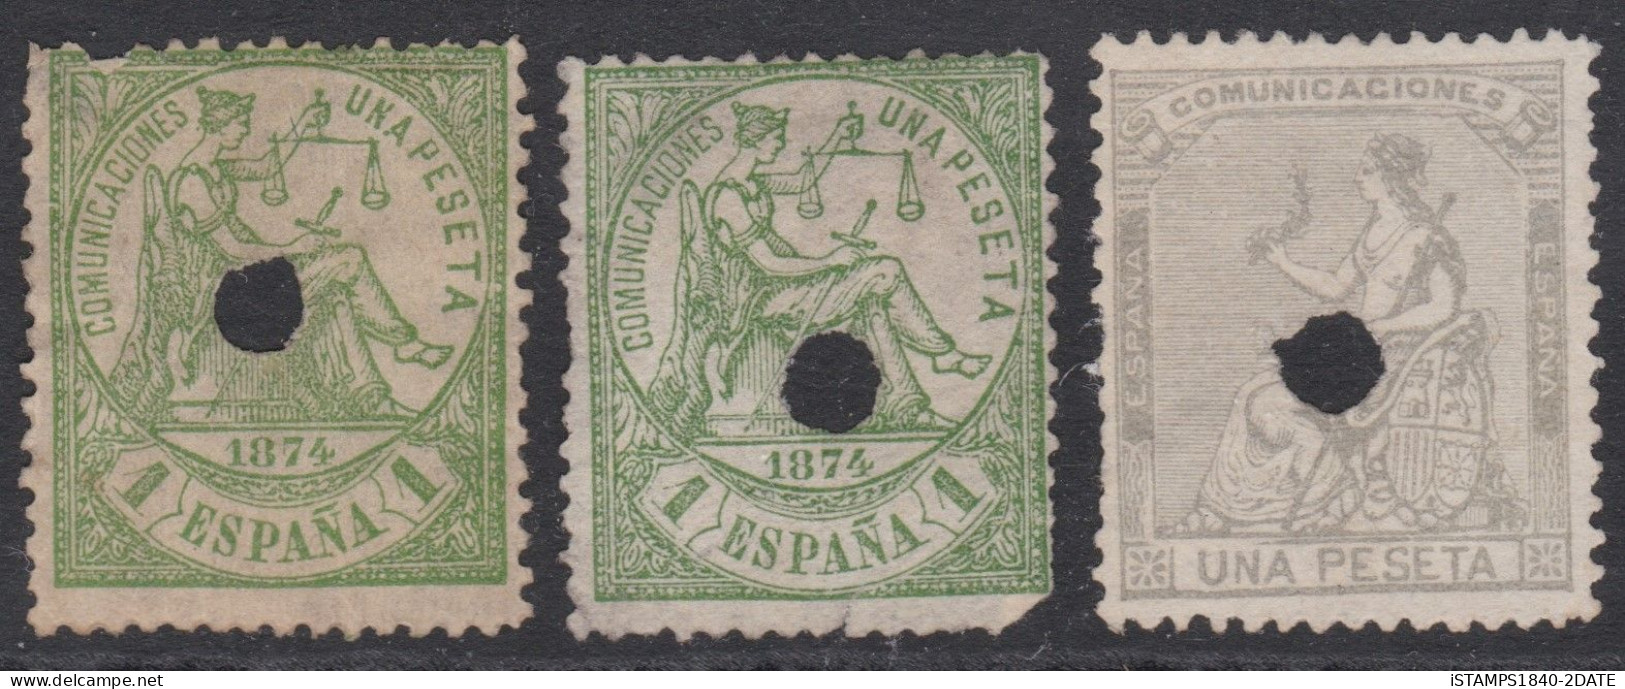 00619/ Spain 1873/74 Mint Telegraphed (Drilled Hole) X3 Allegorical Figure Of Peace + Justice - Collections